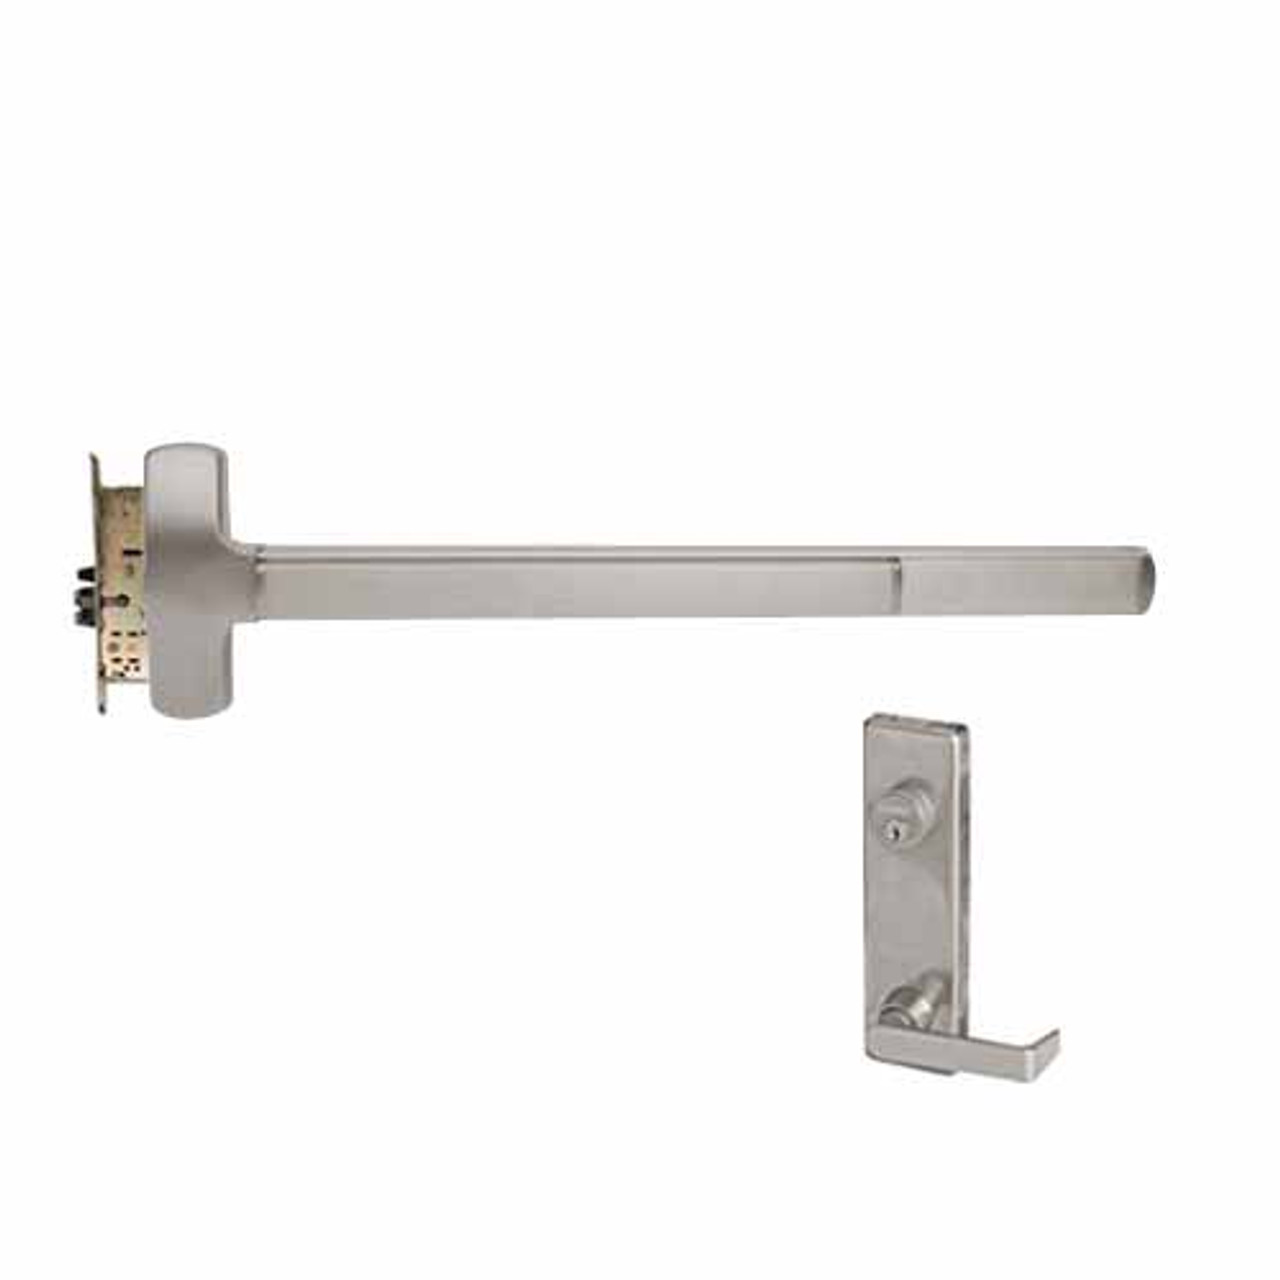 F-25-M-L-NL-Dane-US32D-3-LHR Falcon Exit Device in Satin Stainless Steel